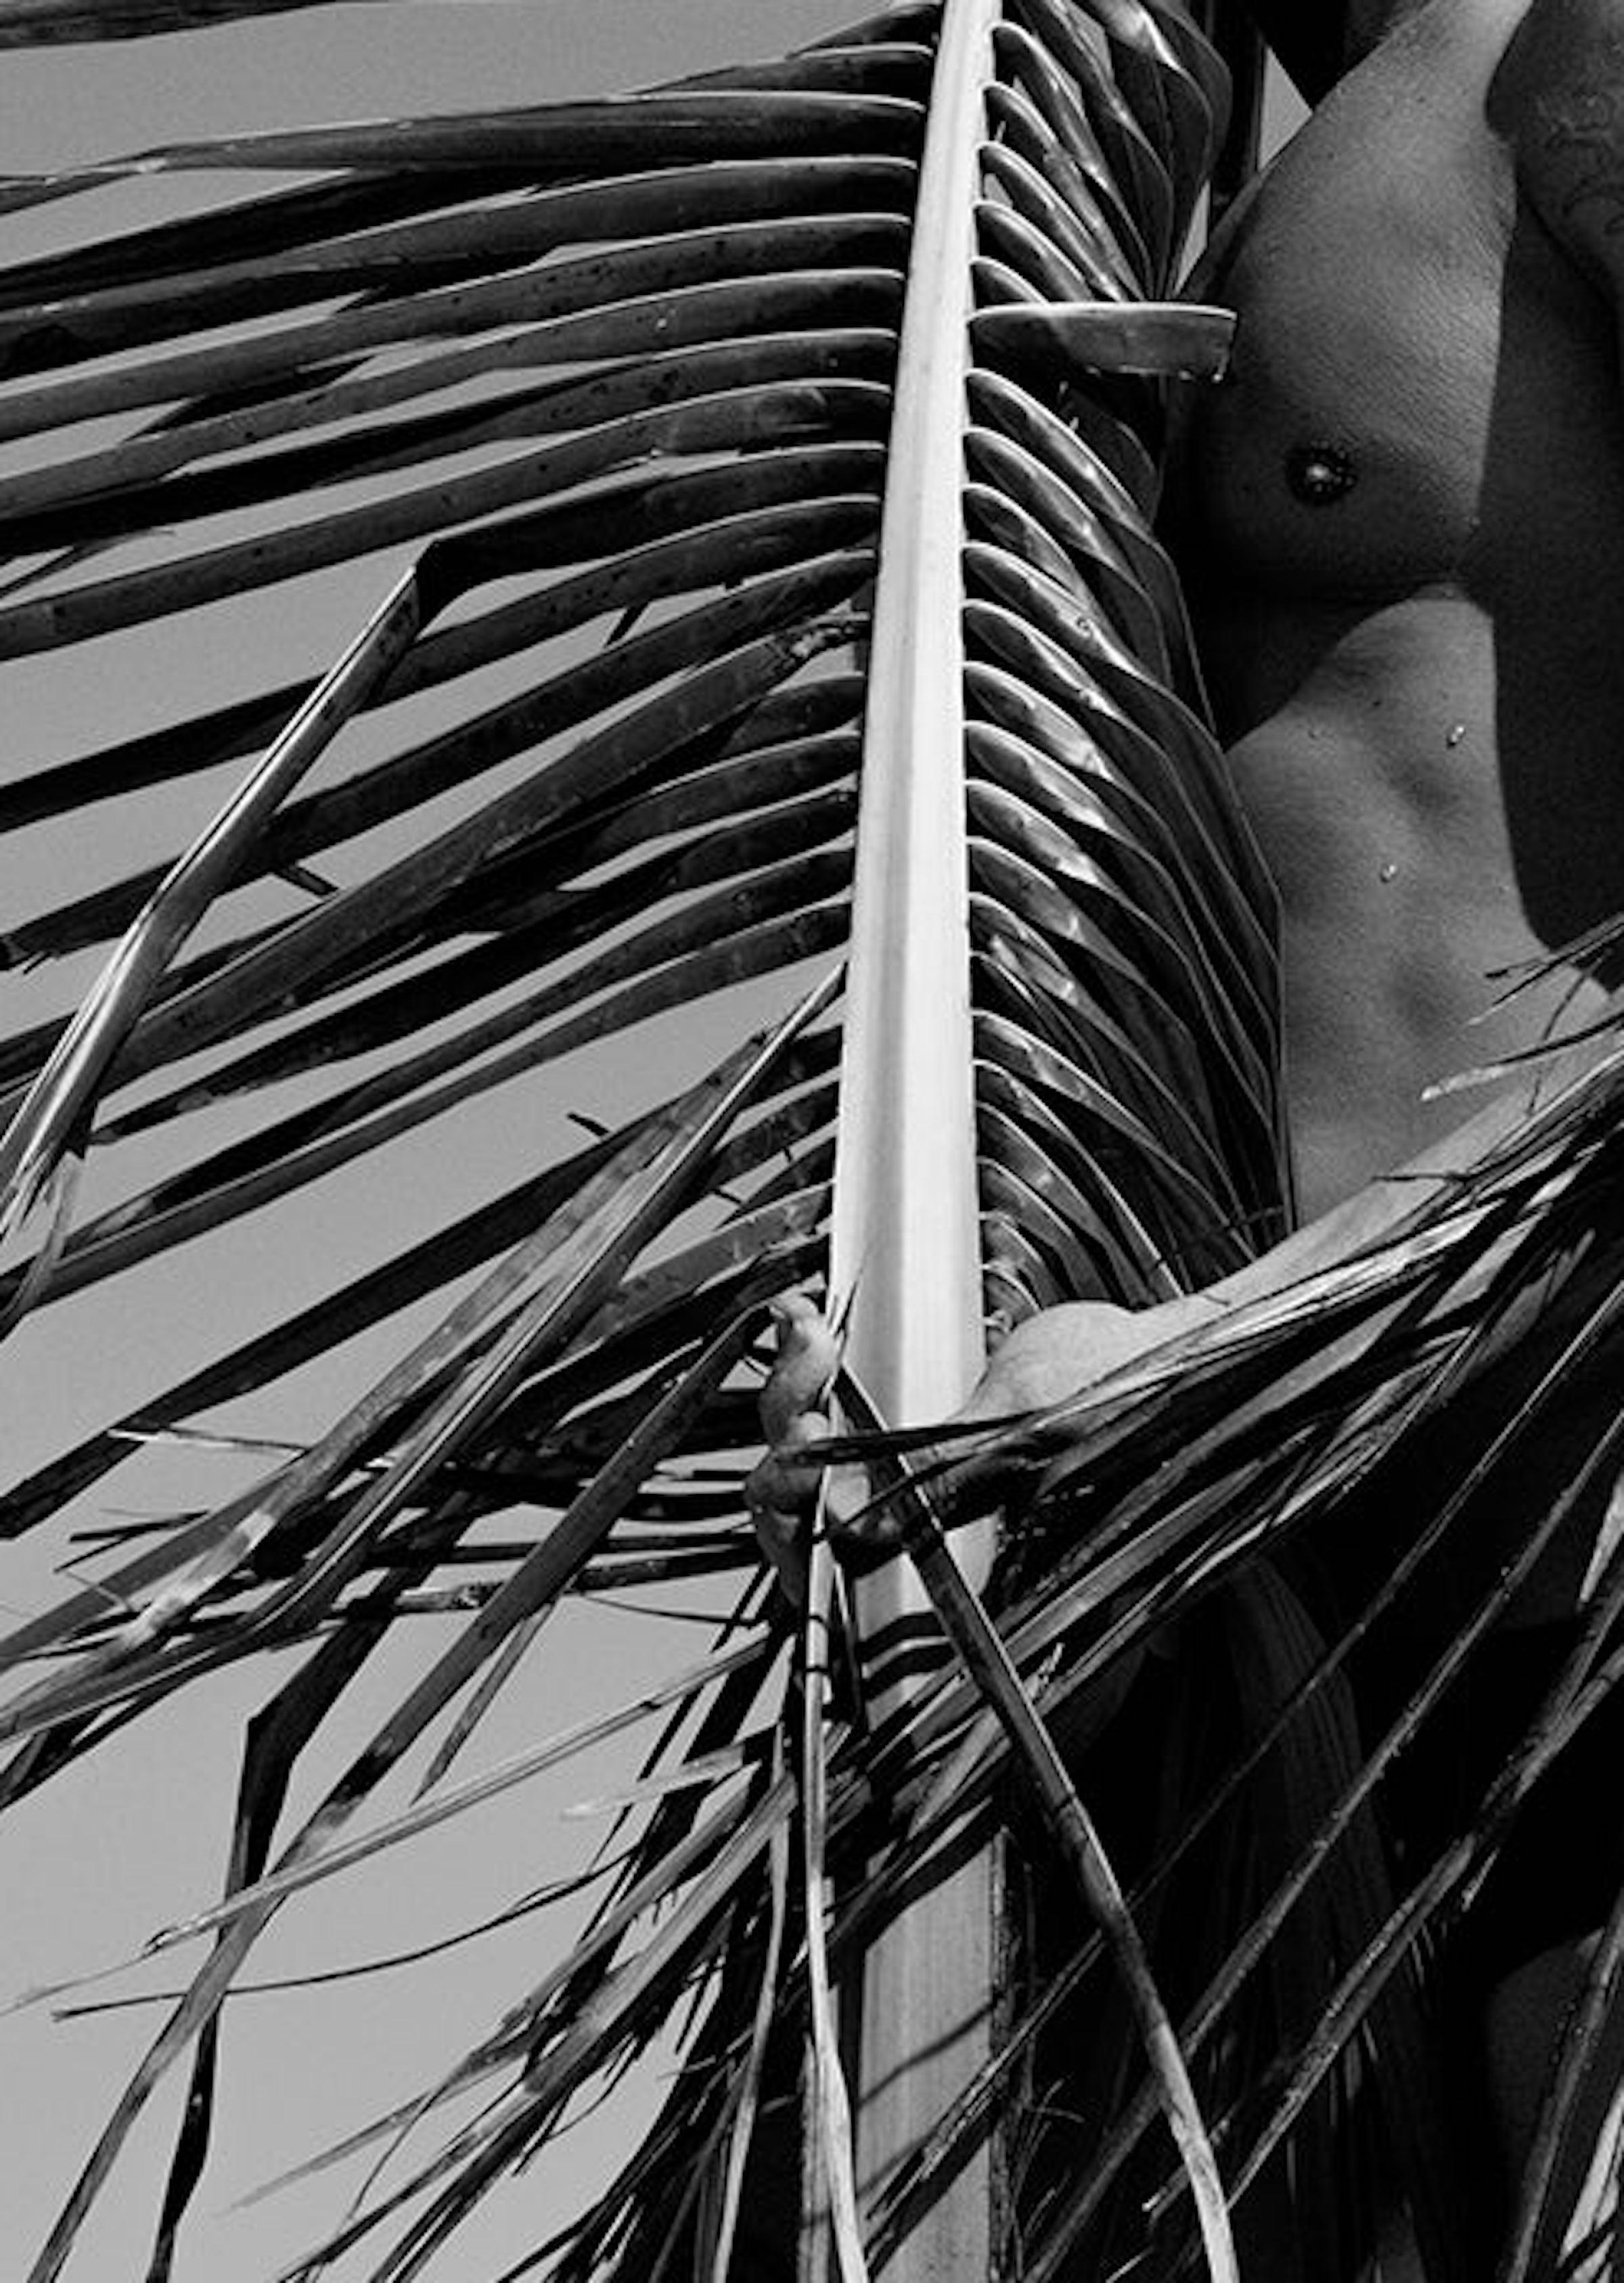 Black and White  Archival Pigment print
Medium Ed of 10.

Palm & Trees: For this series, the artist explores short poems, the expansion of the palms, textures, and ease of the male figure surrounded by the sea and skies. He added that he is always